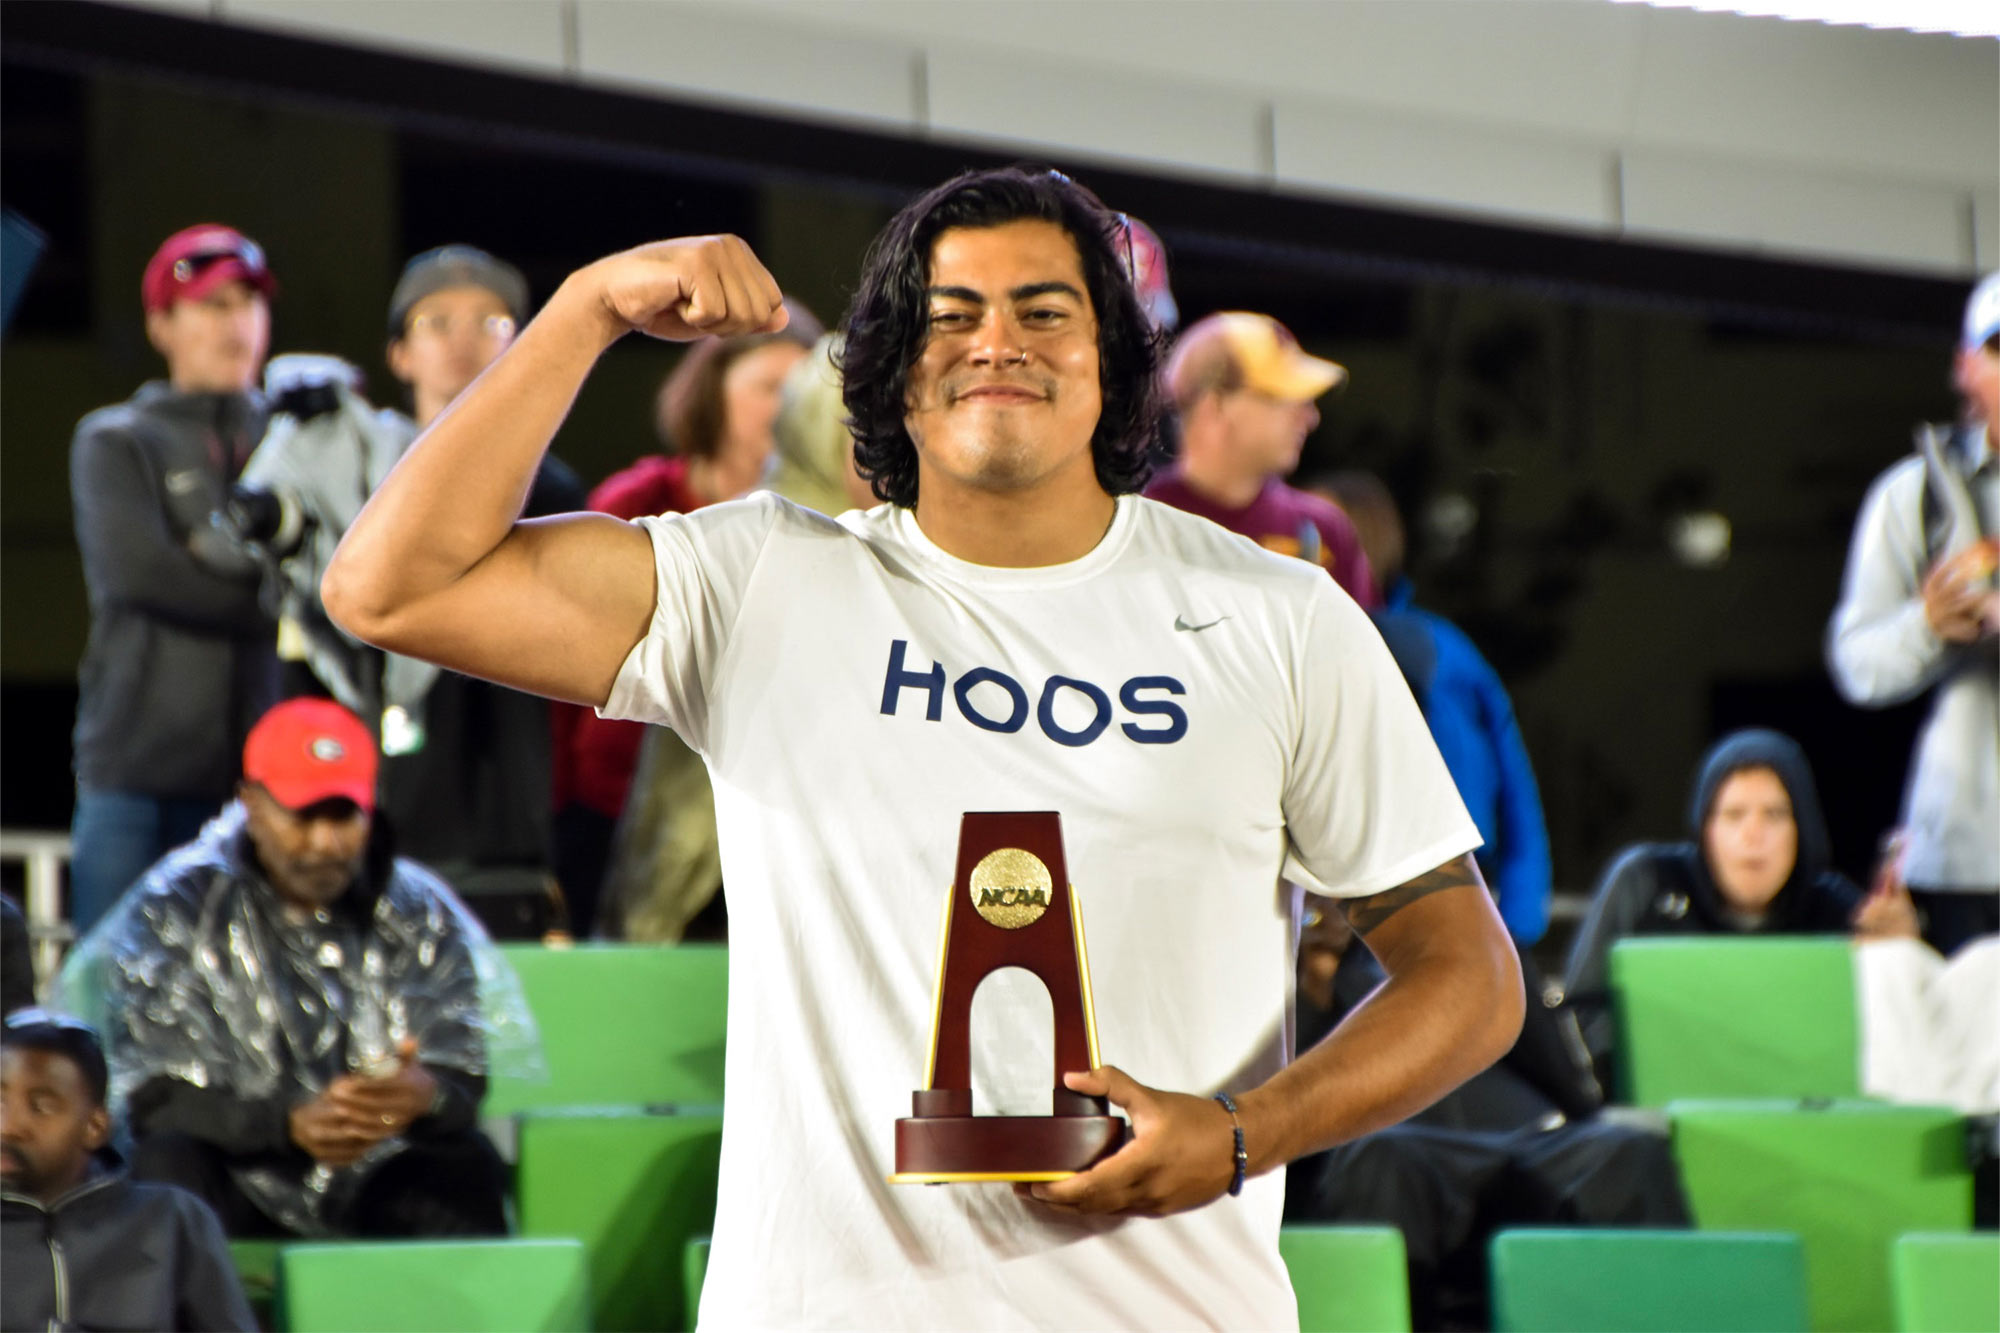 Romero holds the NCAA trophy and flexes his bicep